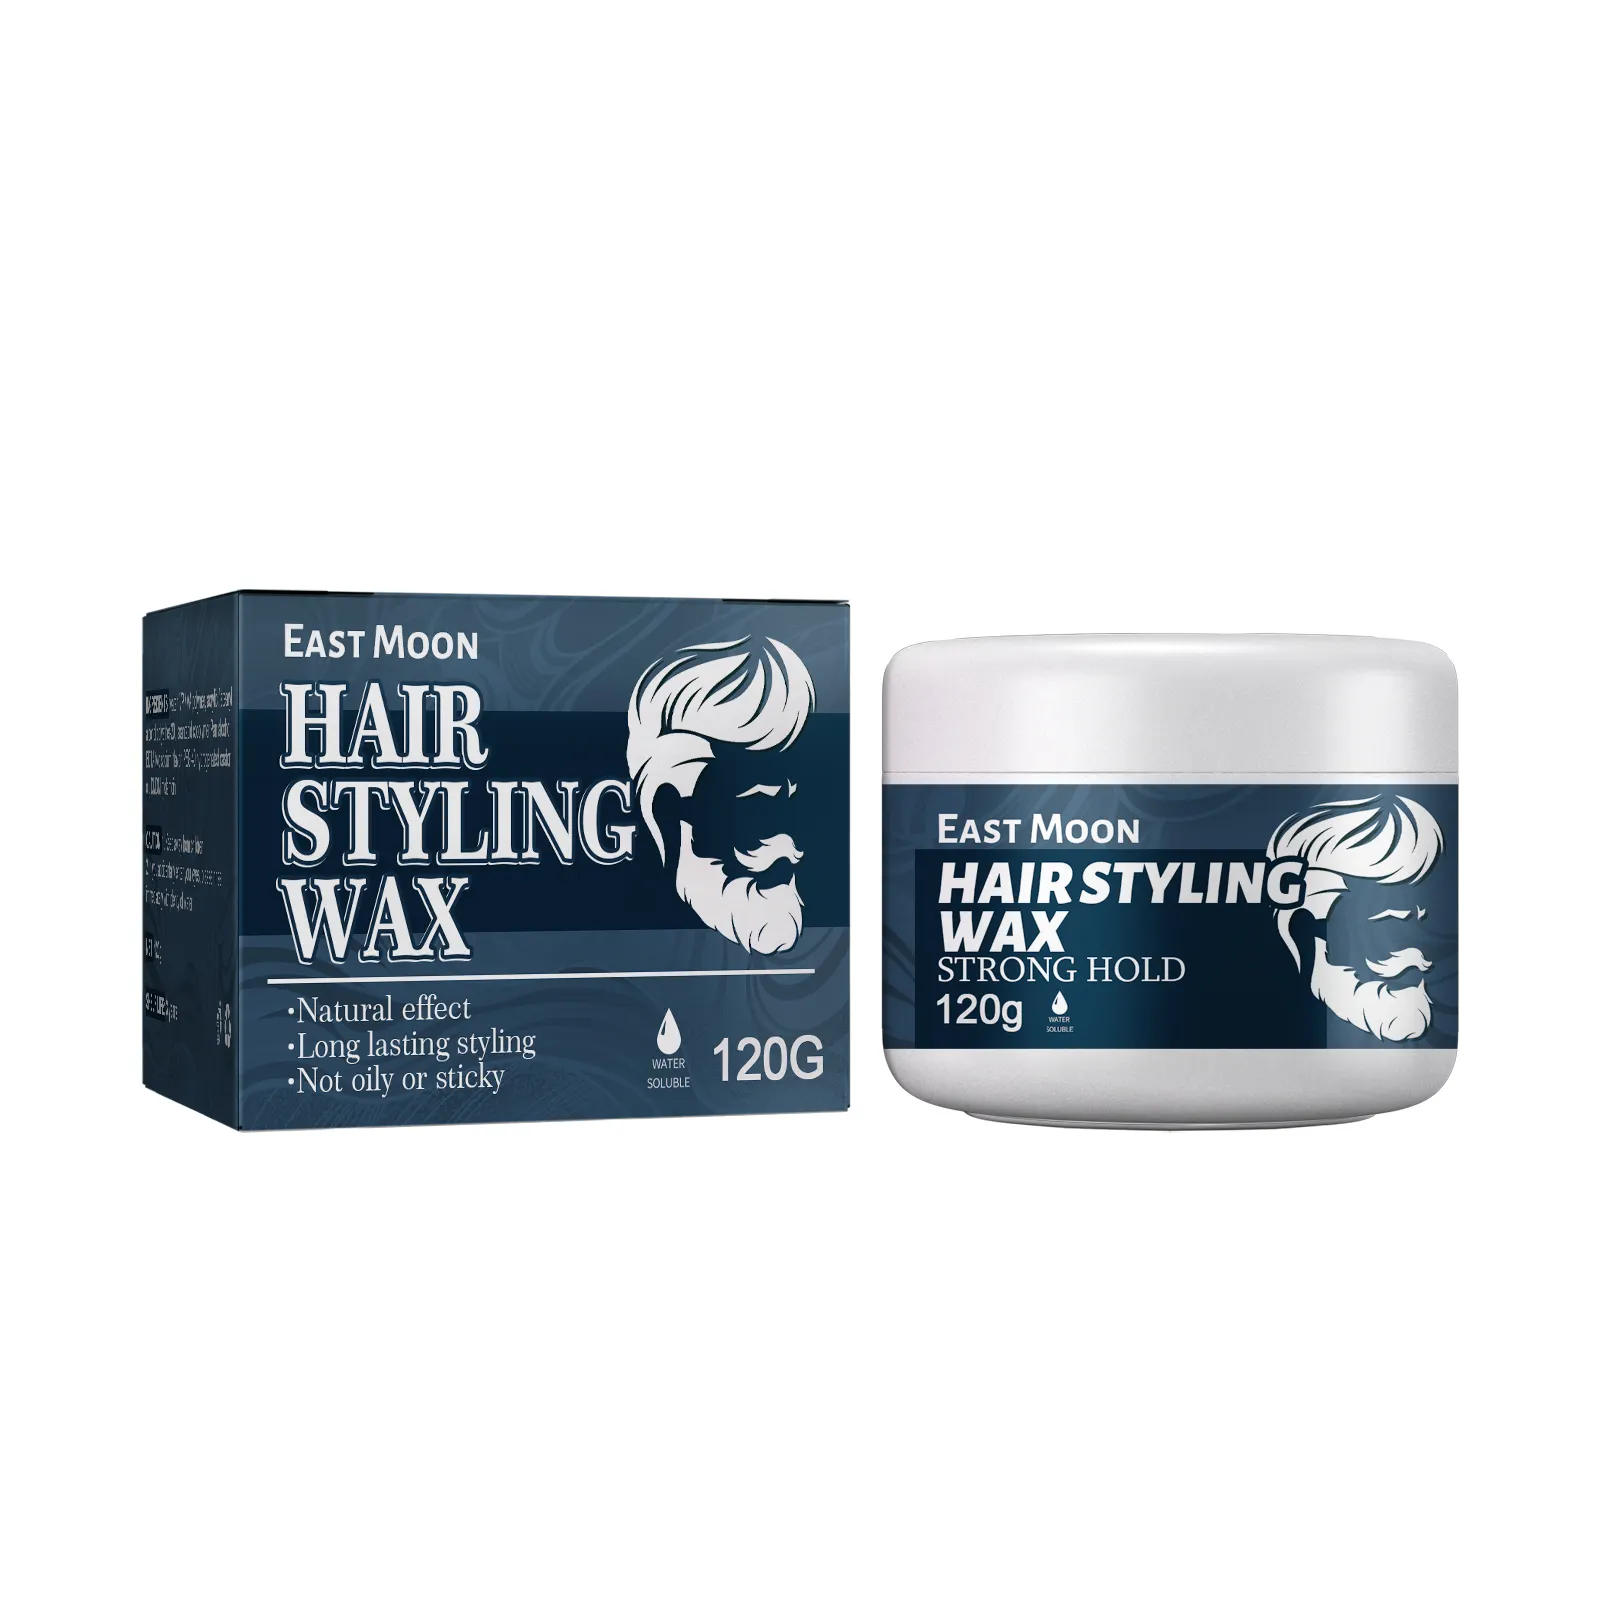 OEM Fashion crew hair products high quality hair paste dry wax hair styling products natural wax for men